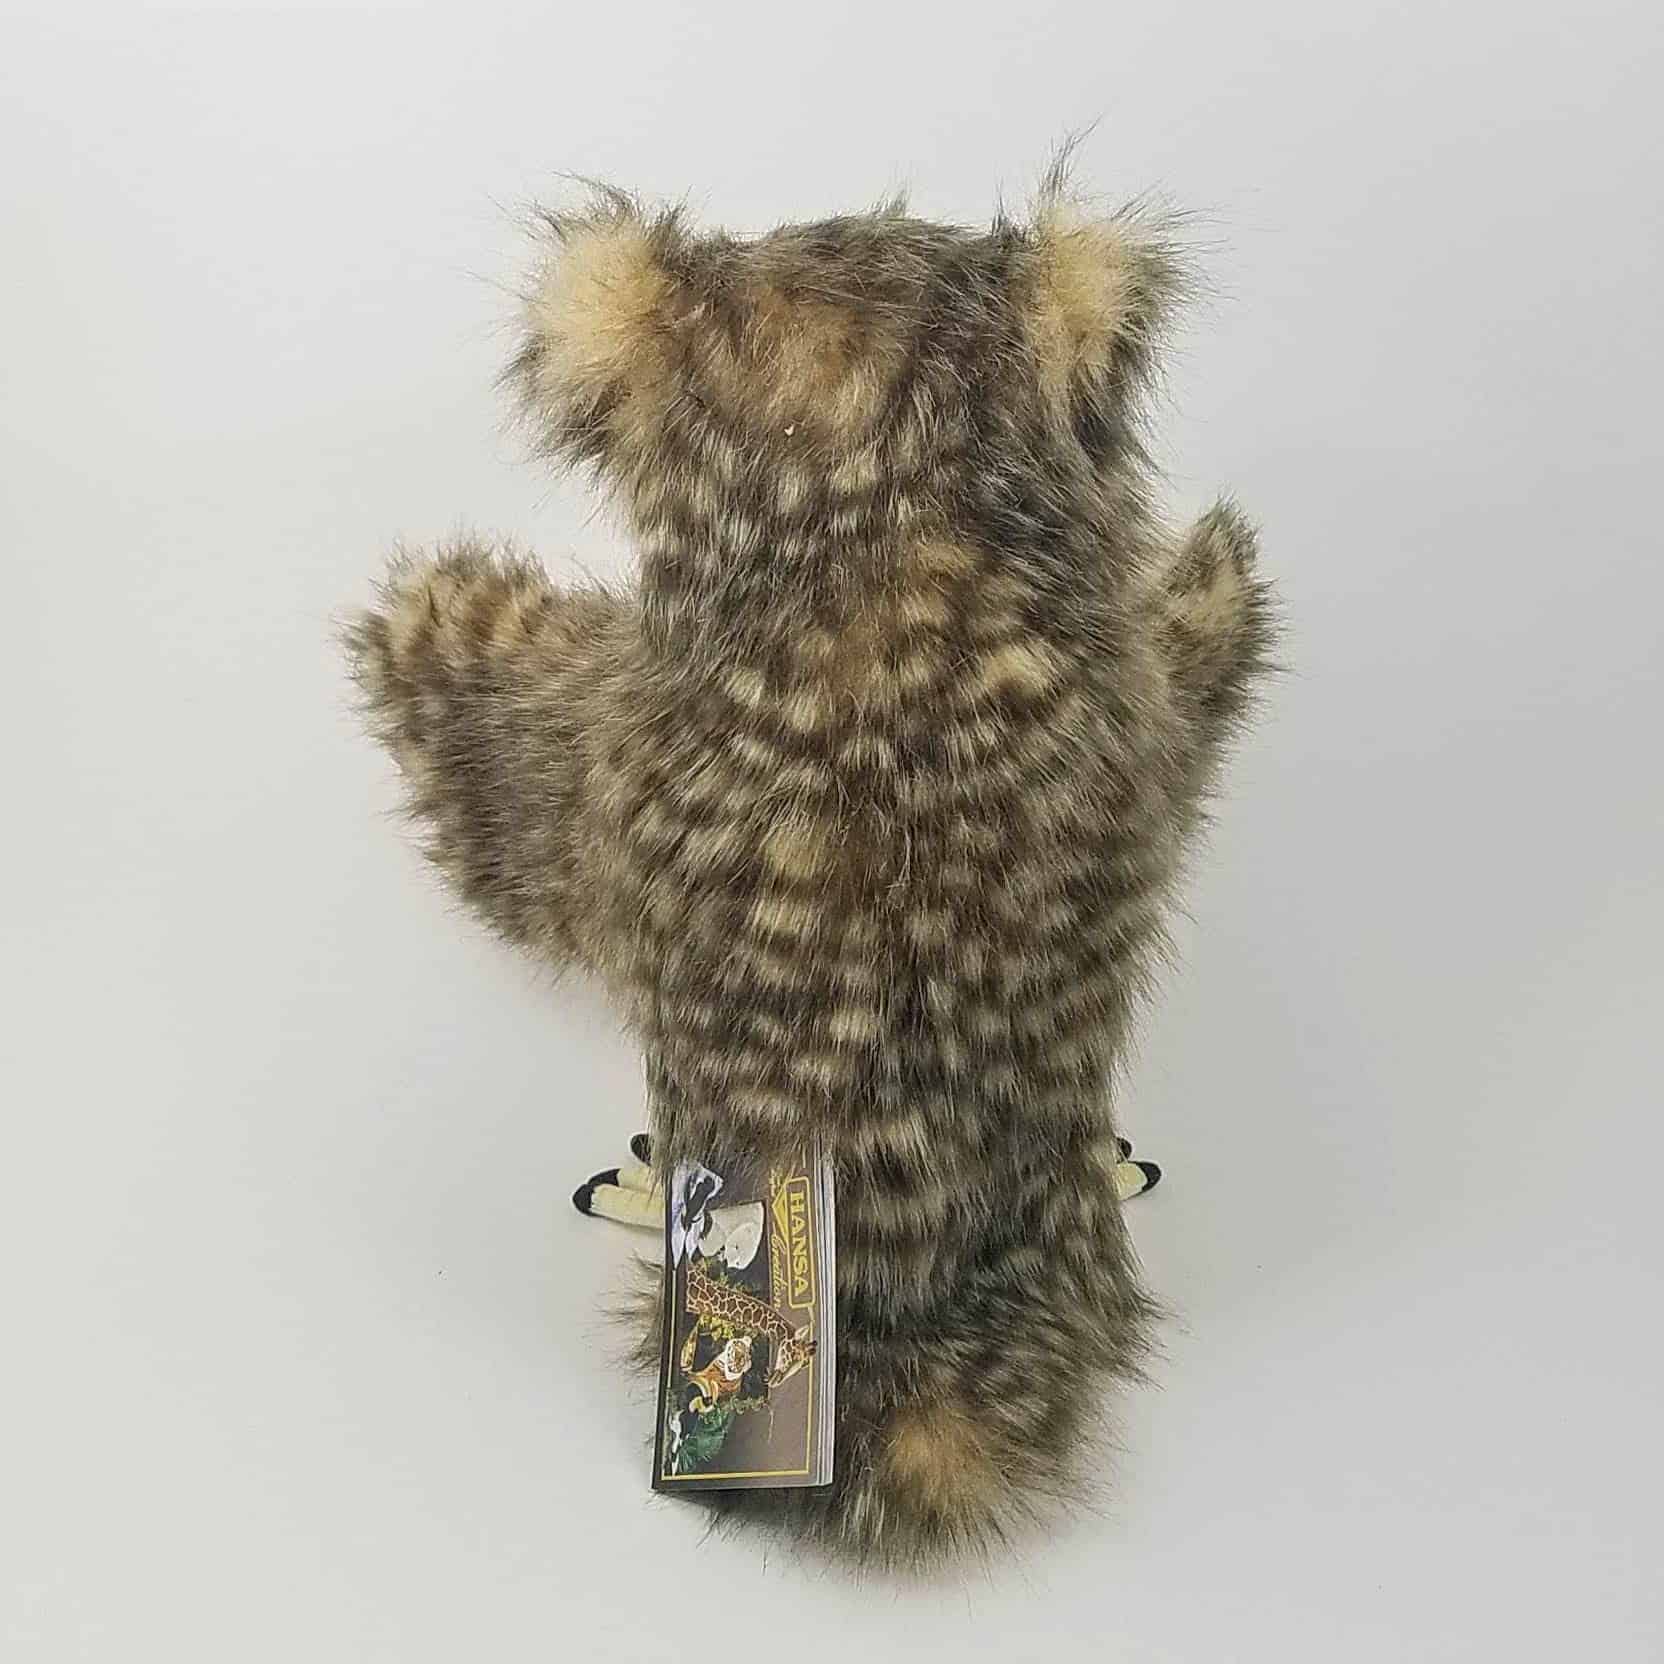 This Owl Hand Puppet by Hansa True to Life Looking Soft Plush Animal Learning Toy is made with love by Premier Homegoods! Shop more unique gift ideas today with Spots Initiatives, the best way to support creators.